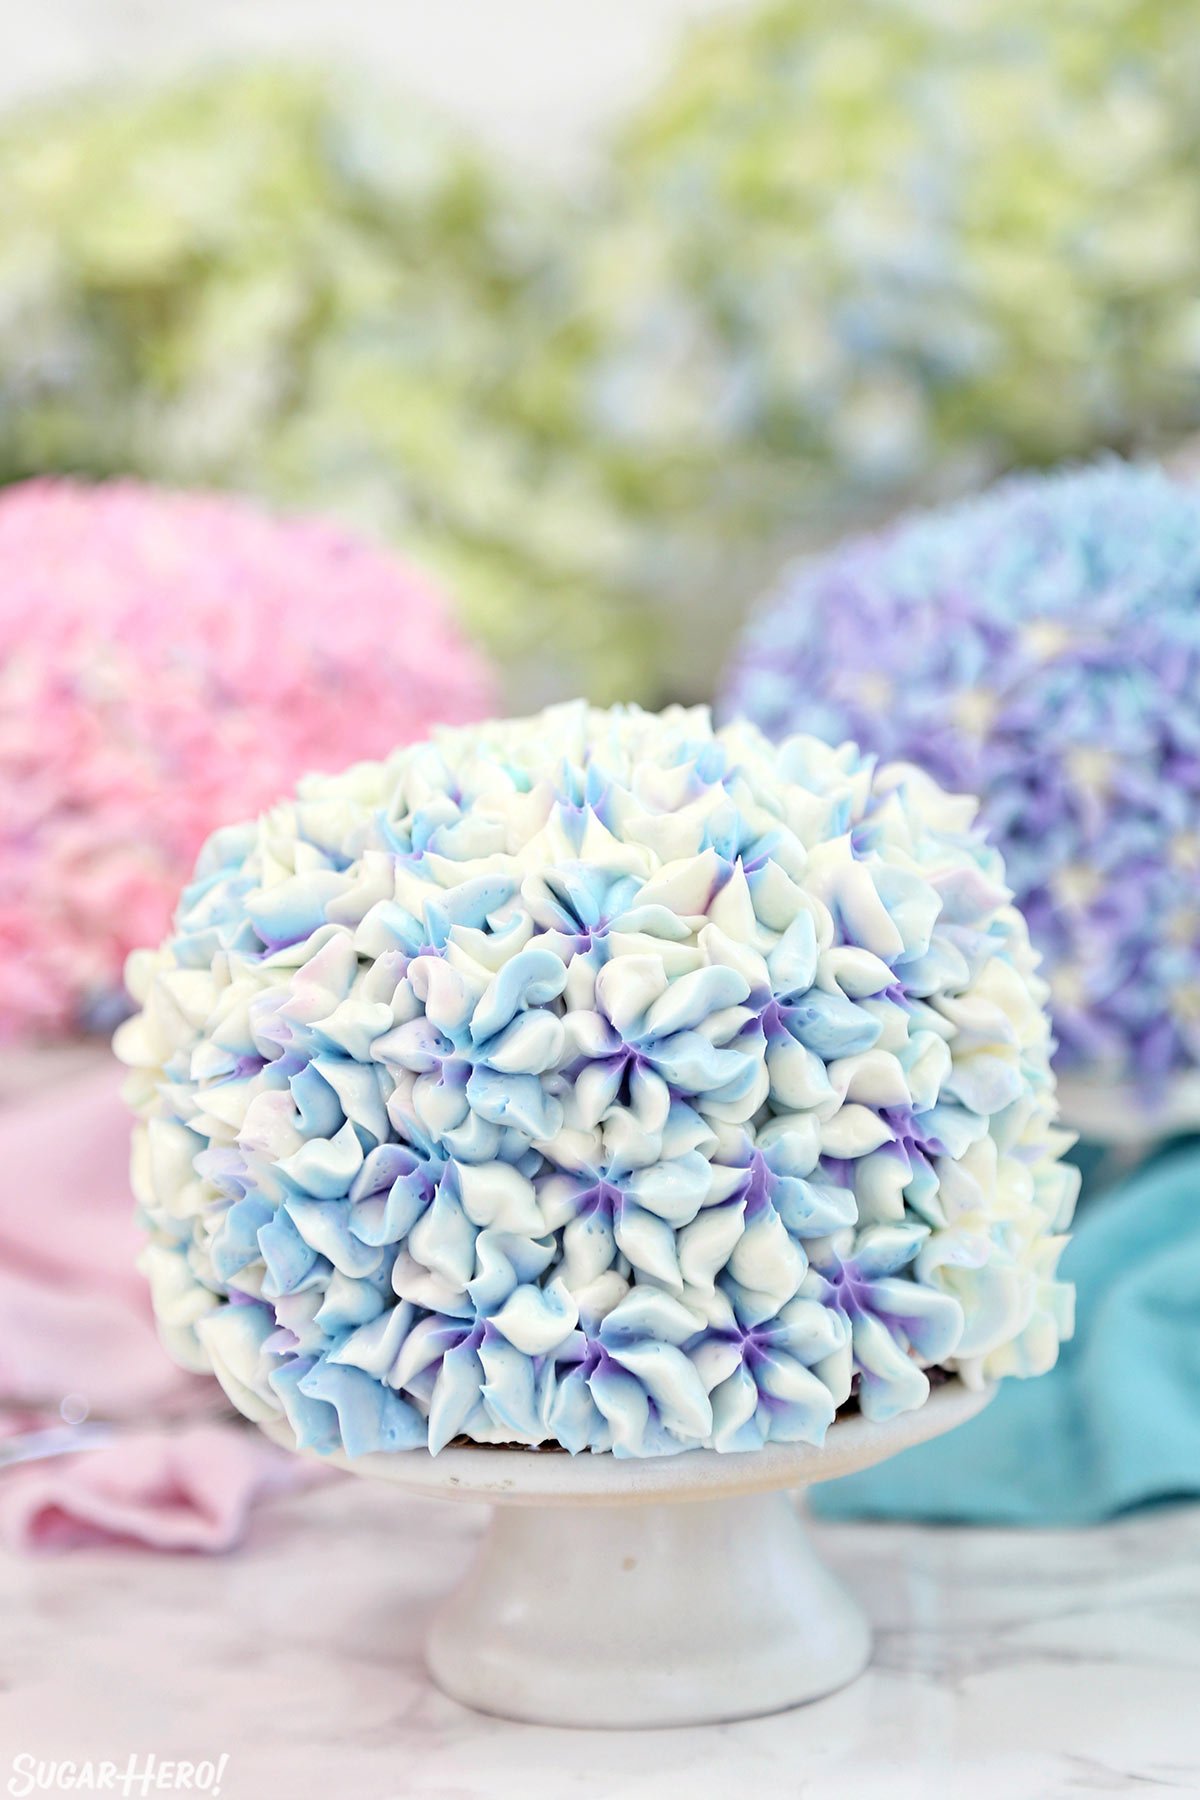 Hydrangea Cakes - A close up shot of a cake on a cake stand with blurred ones in the back. | From SugarHero.com